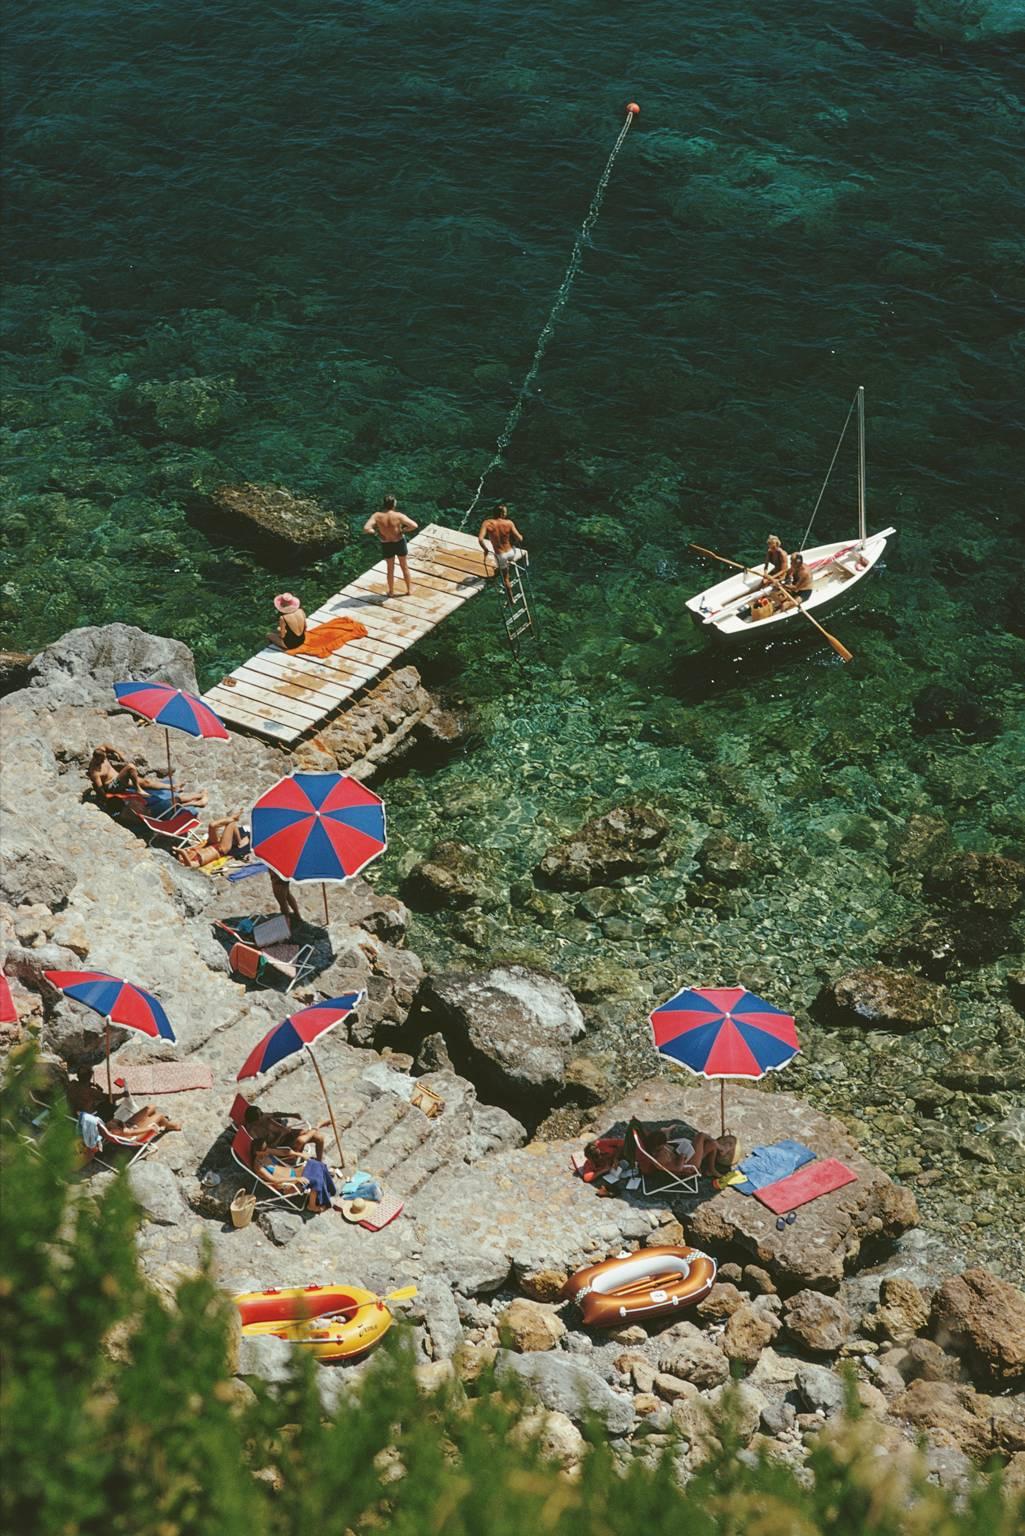 'Porto Ercole' Italy  (Slim Aarons Estate Edition)

A jetty juts out from the rocky shoreline at the Hotel Il Pellicano in Porto Ercole, Tuscany, August 1973.

Beautiful greens of the sea water contrast with the red and blue parasols, gorgeous